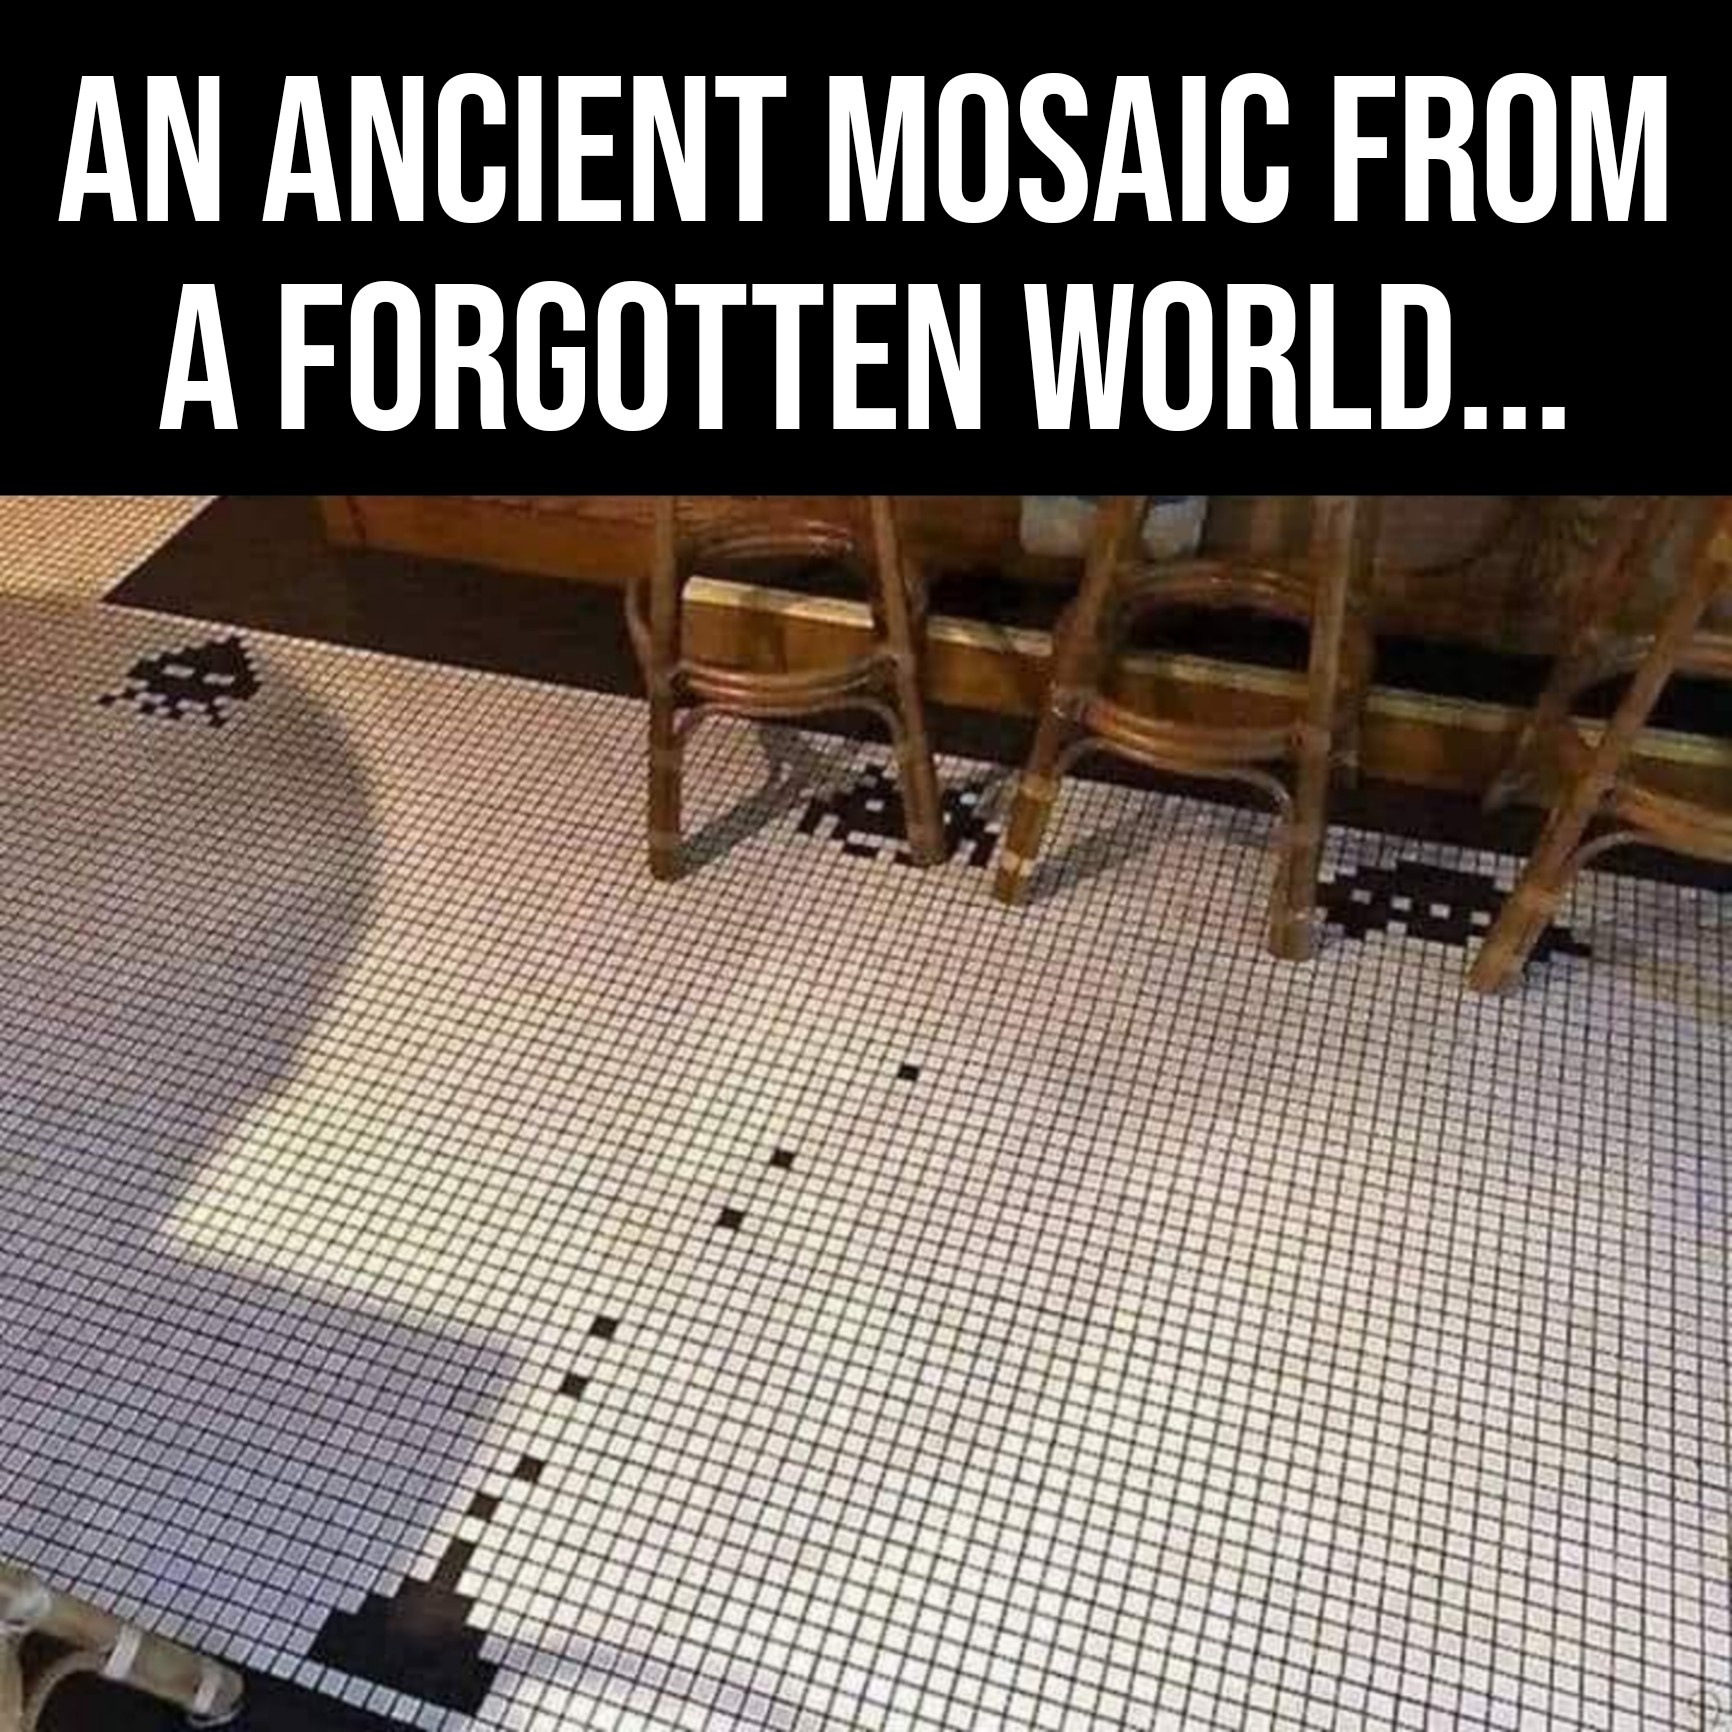 funny gaming memes - white city tube station - An Ancient Mosaic From A Forgotten World...